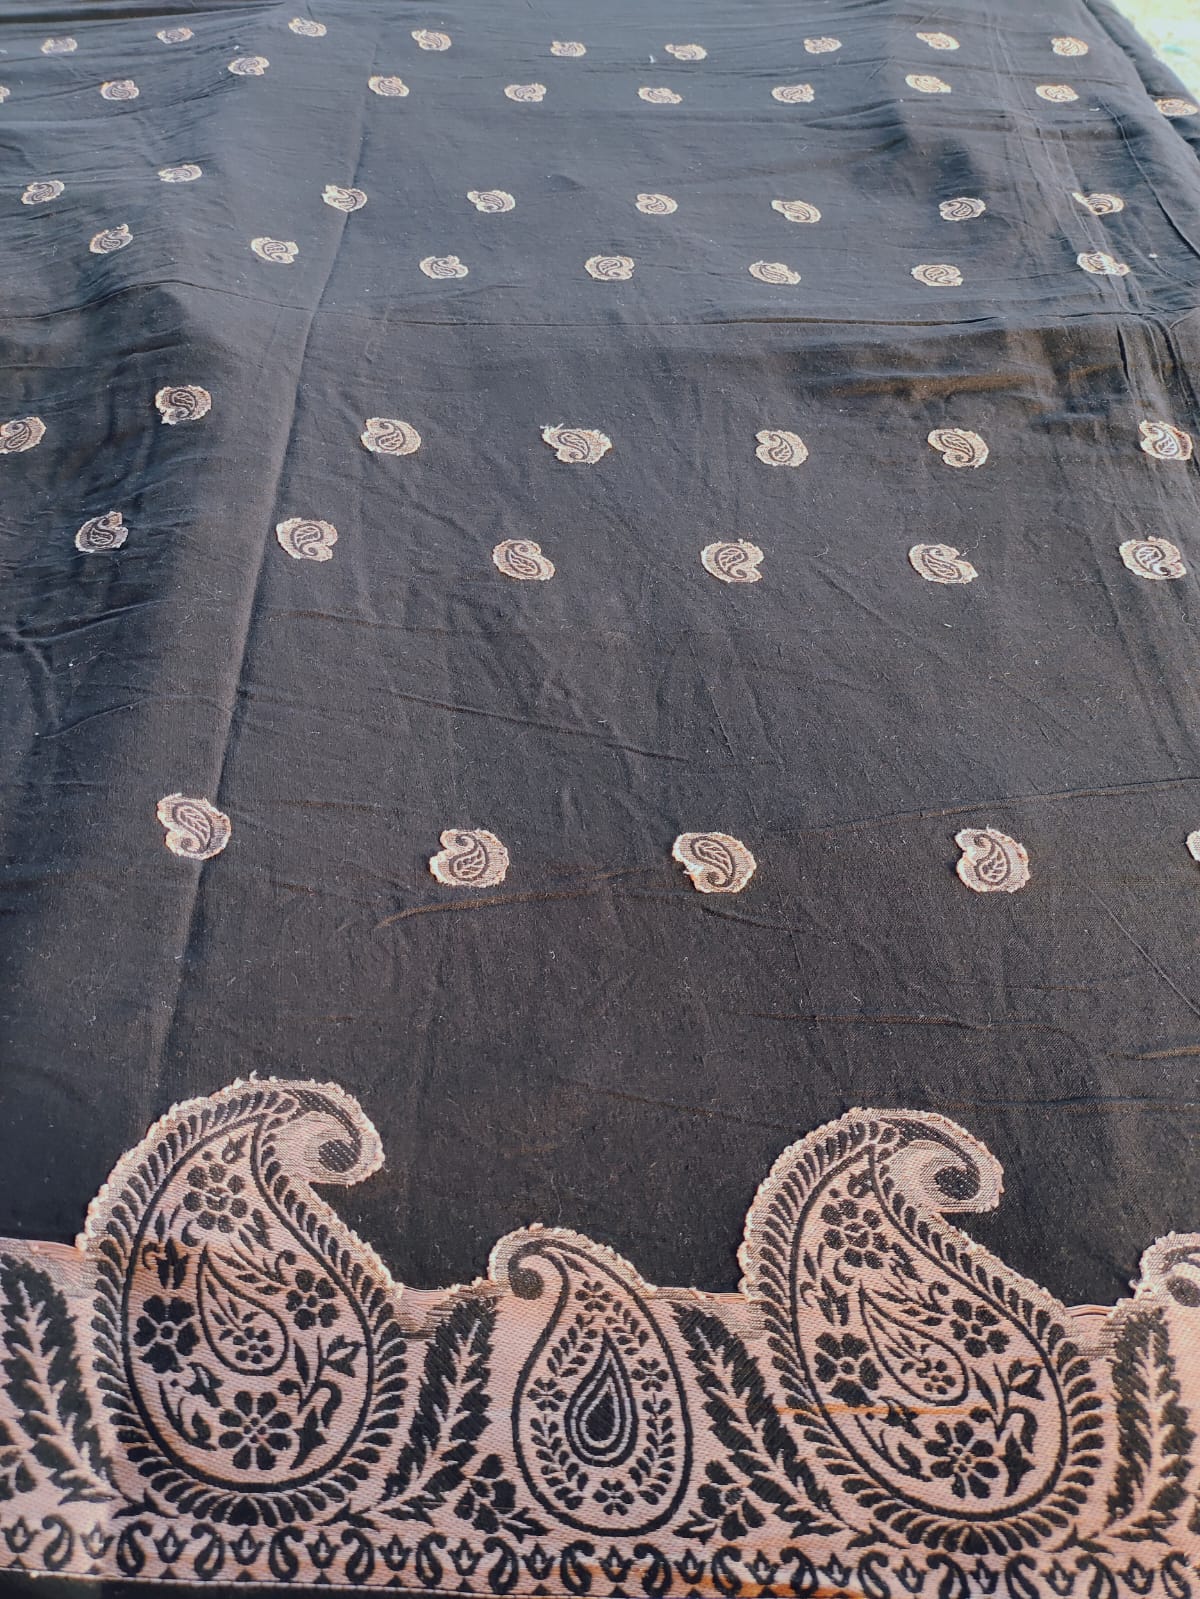 Black cotton Jaquard width 44 inches Fabric per meter